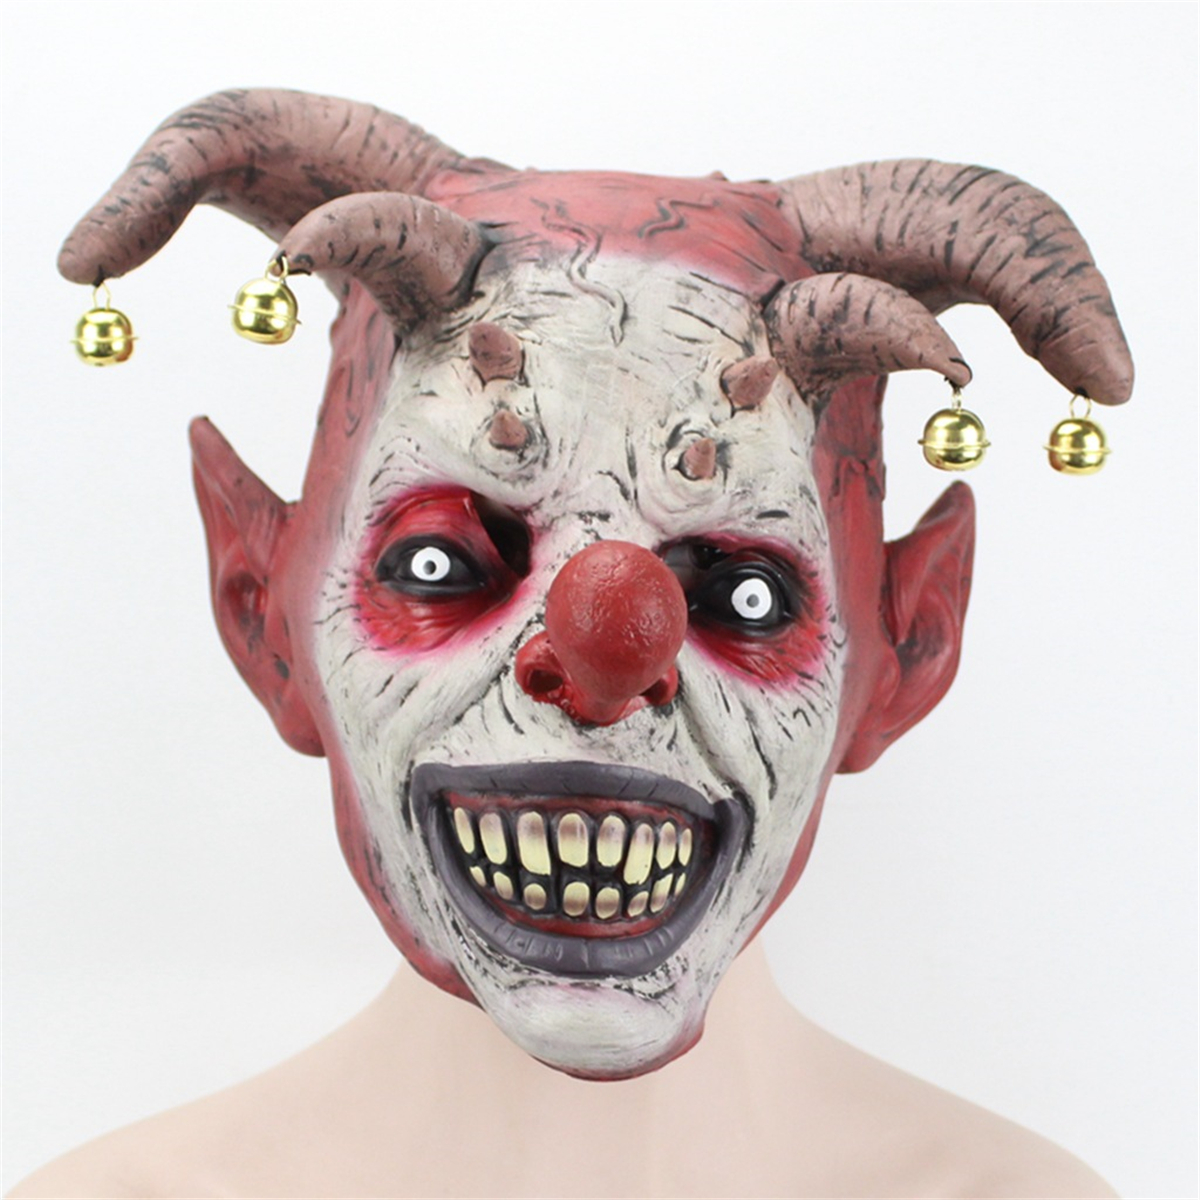 

Creepy Evil Scary Bell Halloween Clown Mask Latex Evil Jester Clown Mask Party